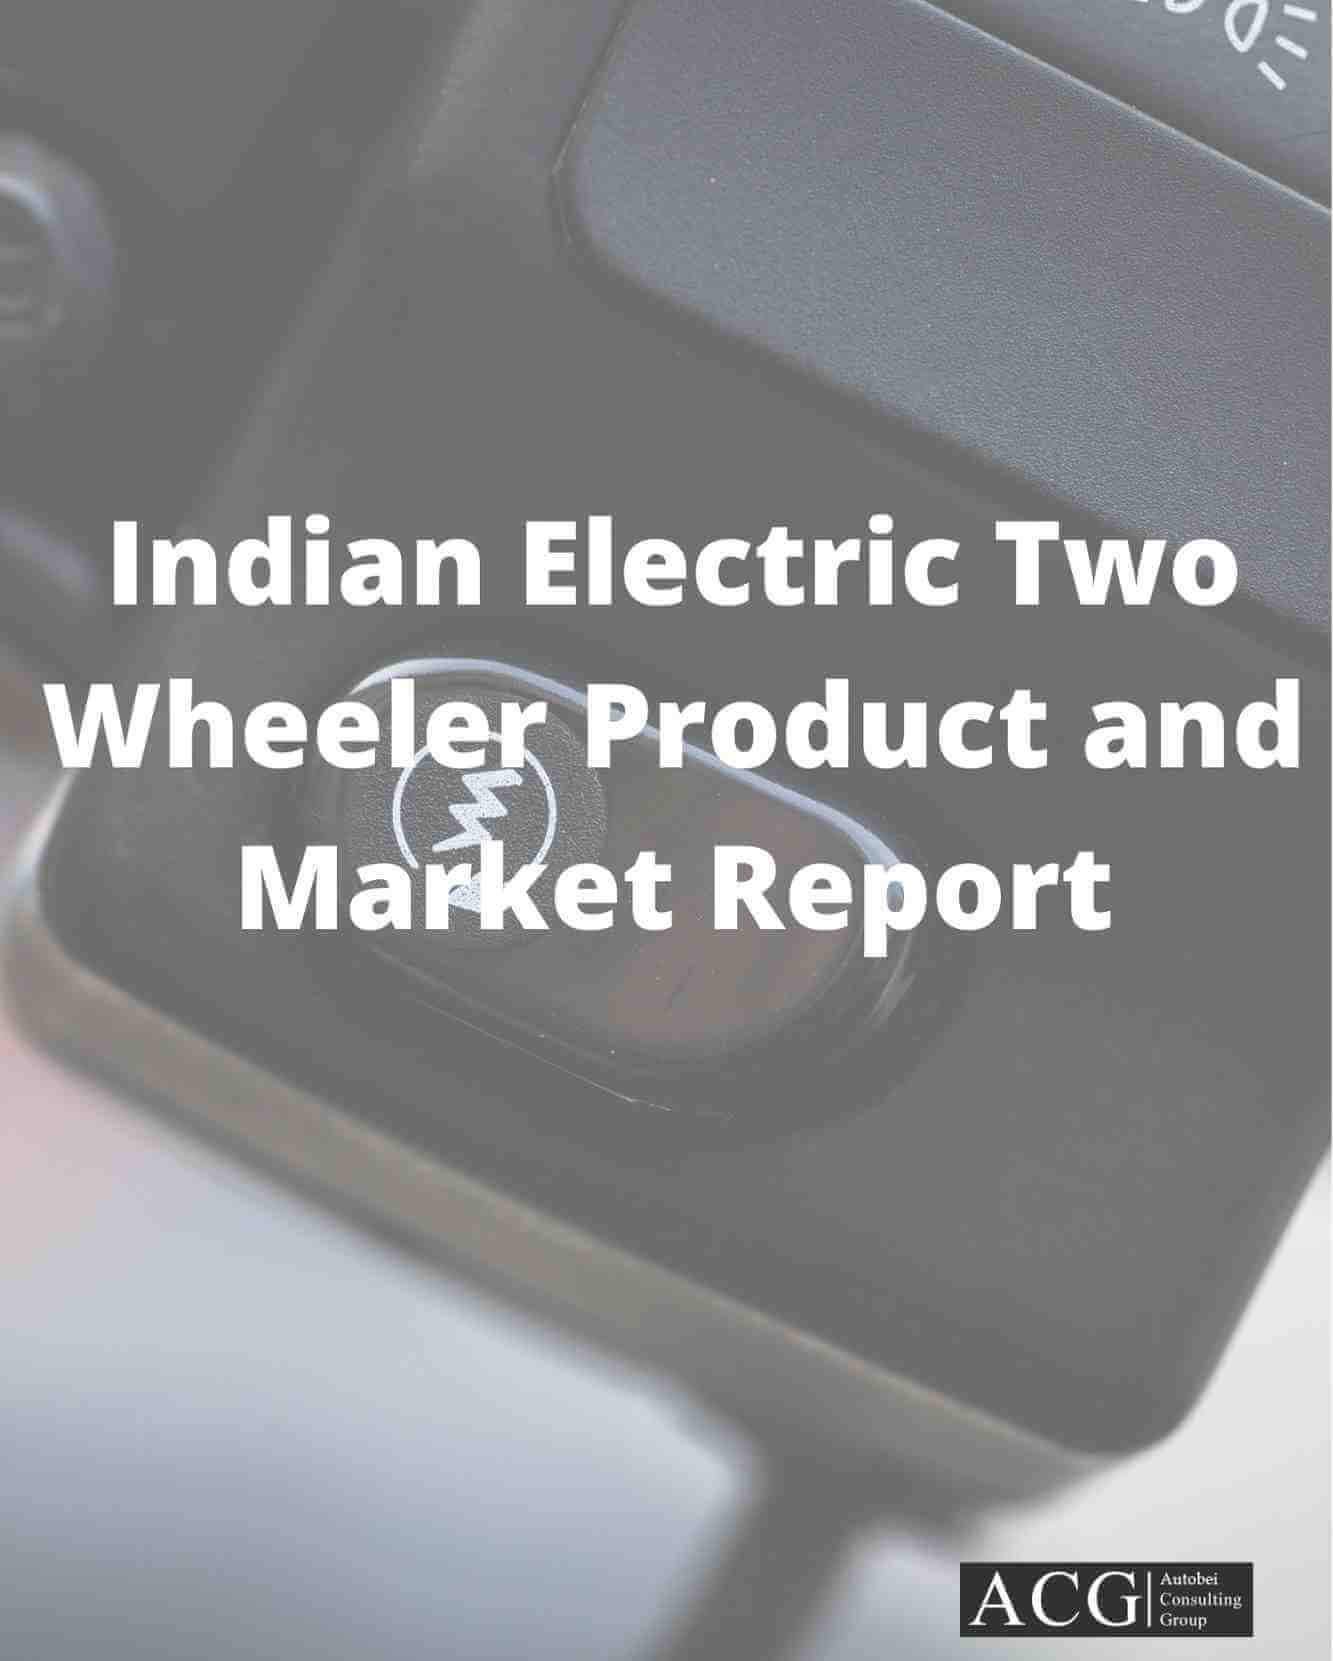 Indian Electric Two Wheeler Product and Market Report